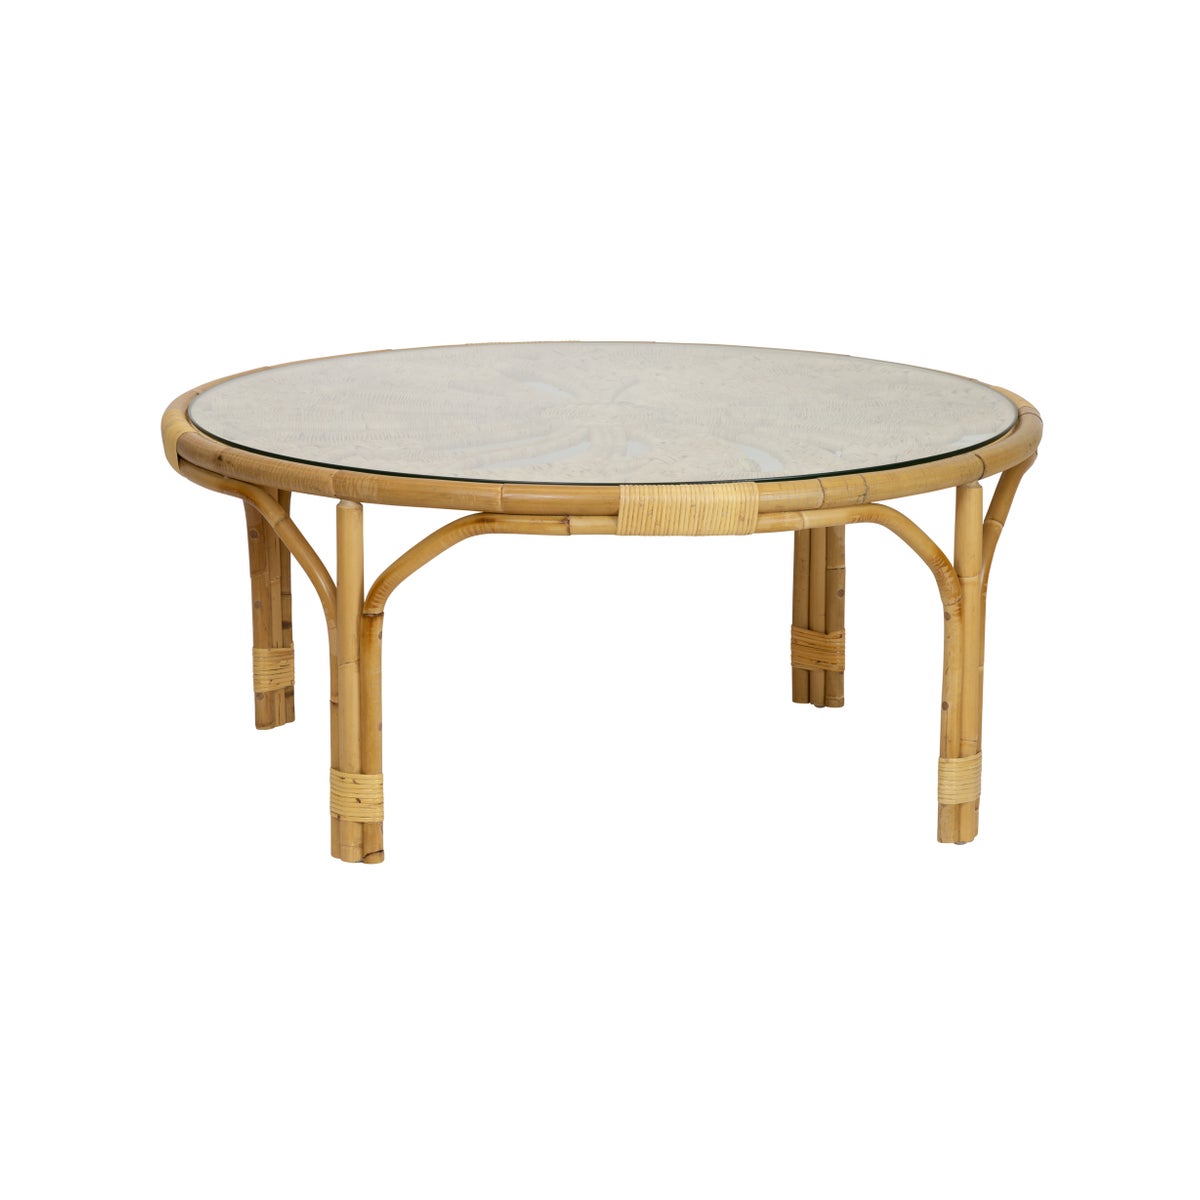 Honeysuckle Coffee Table in Natural